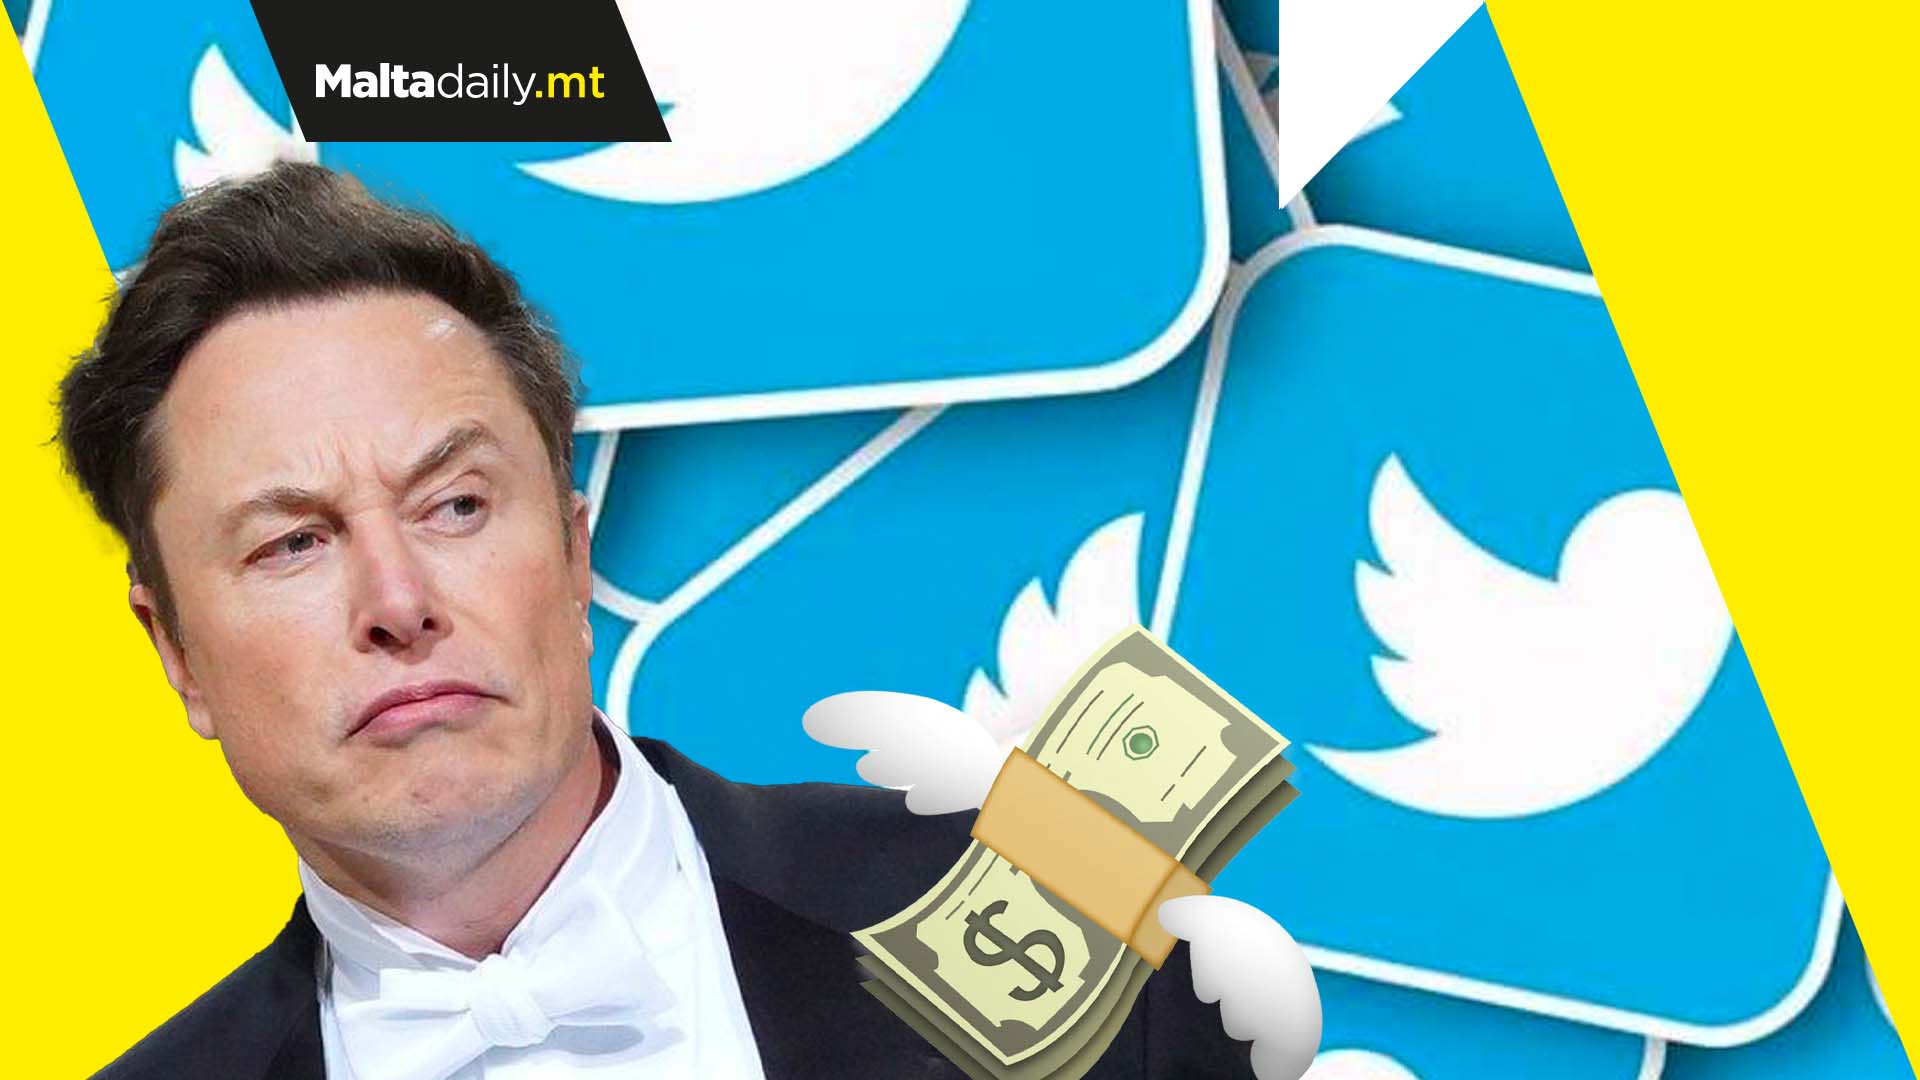 Elon Musk sued by Twitter for backing out of $44 billion deal